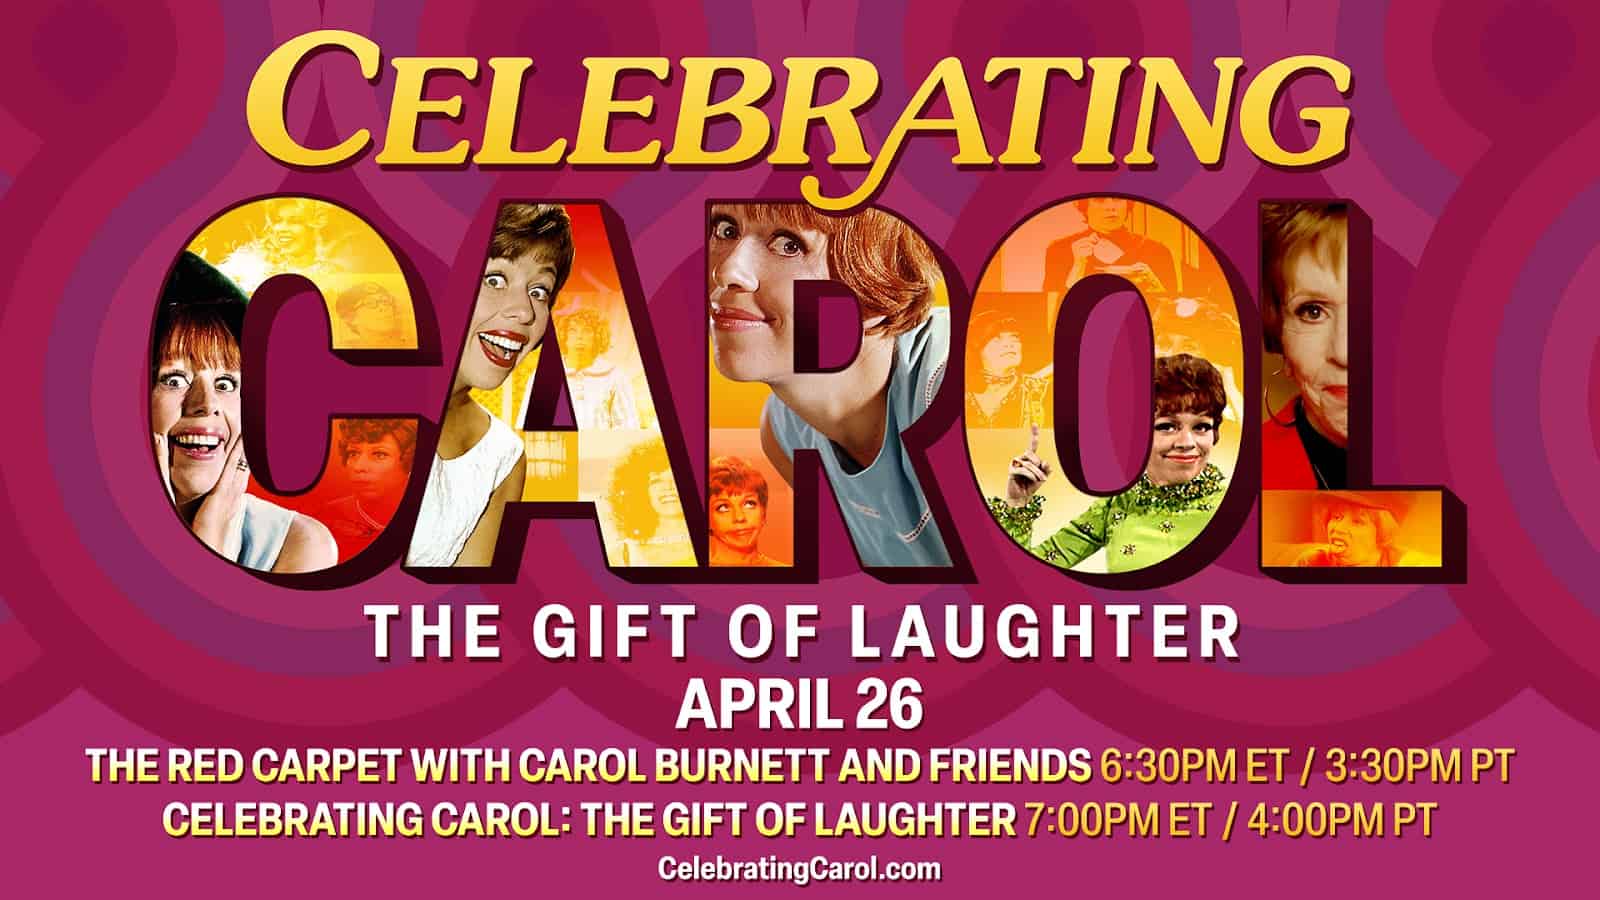 Shout! Factory TV Honors Carol Burnett with Exclusive Streaming Event. Did you watch? 23